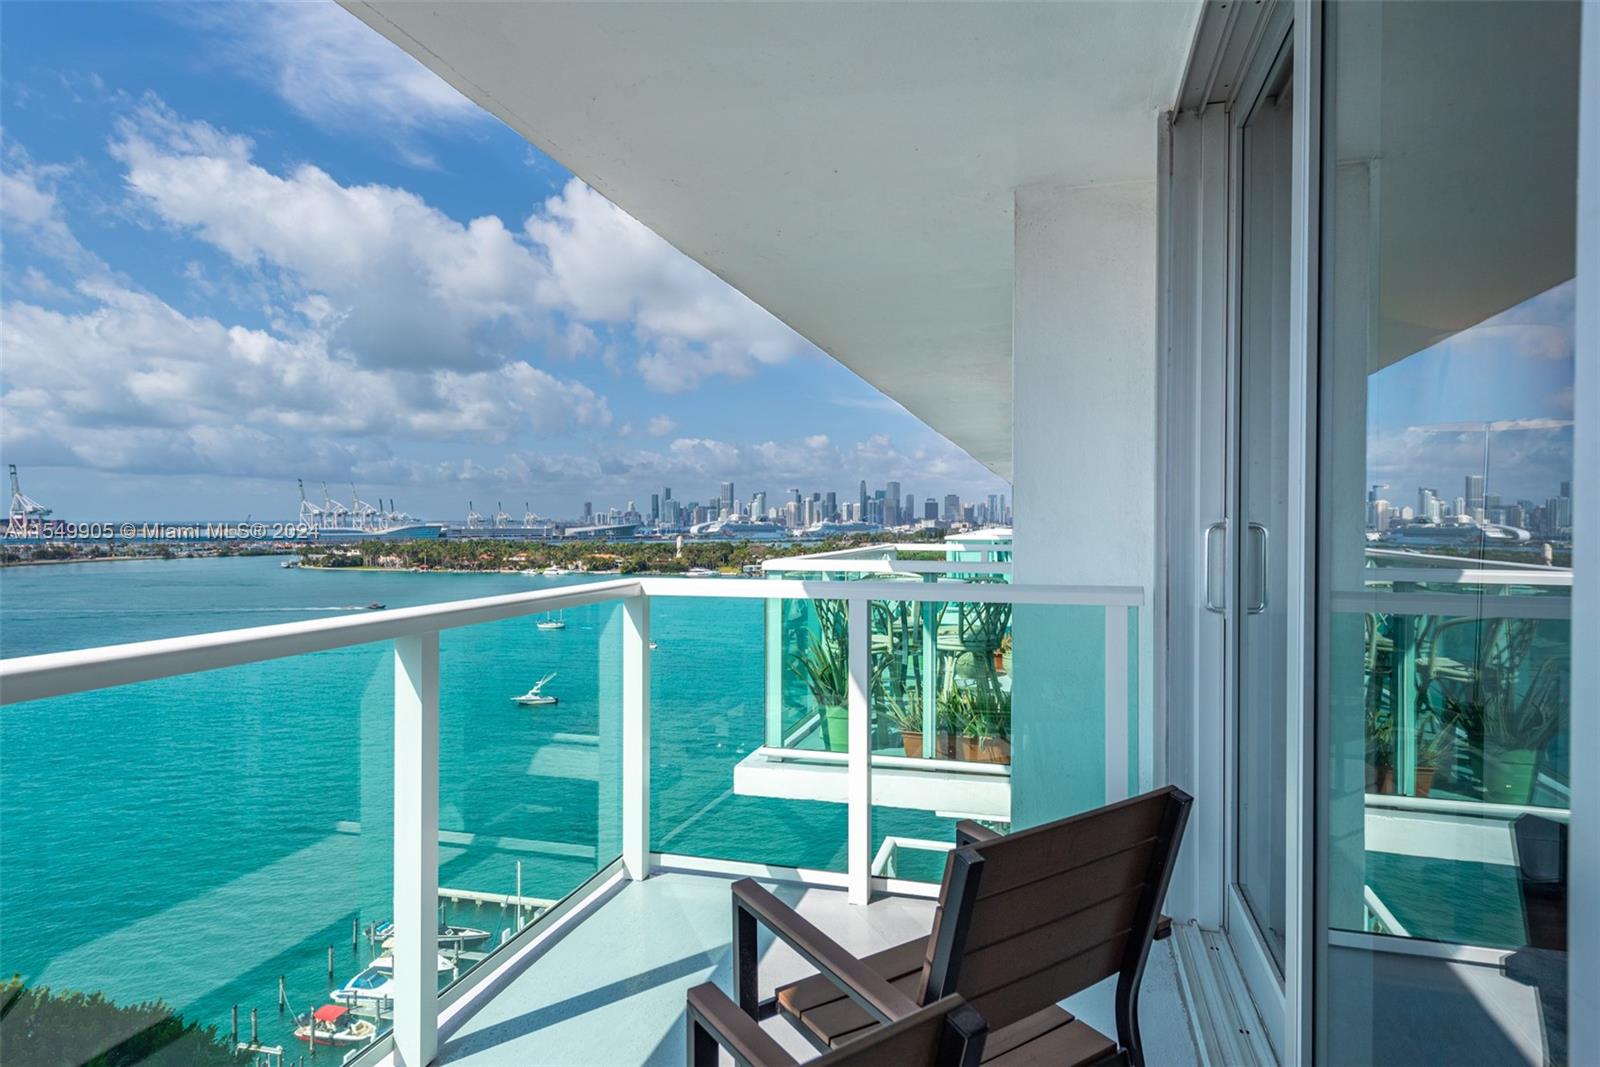 One of a kind, Corner Unit,  pied-à-terre. Enjoy open South Beach and Ocean /Bay Views w/ 10.5 foot  soaring  ceilings. This is a very tasteful designed 1 bed/1.5 bath with 969 sq feet of space. Full amenity building , valet , incredible gym and an enormous  freshly renovated pool /jacuzzi/ grill areas. Classic Mimo building with timeless design. Walking to everything and across street from   Whole Foods, next to Mondrian, Umbria Coffee and Olivers Restaurant. No assigned parking spot BUT Valet Parking is only an additional $80 per month. You have to see this unit, easy to show!